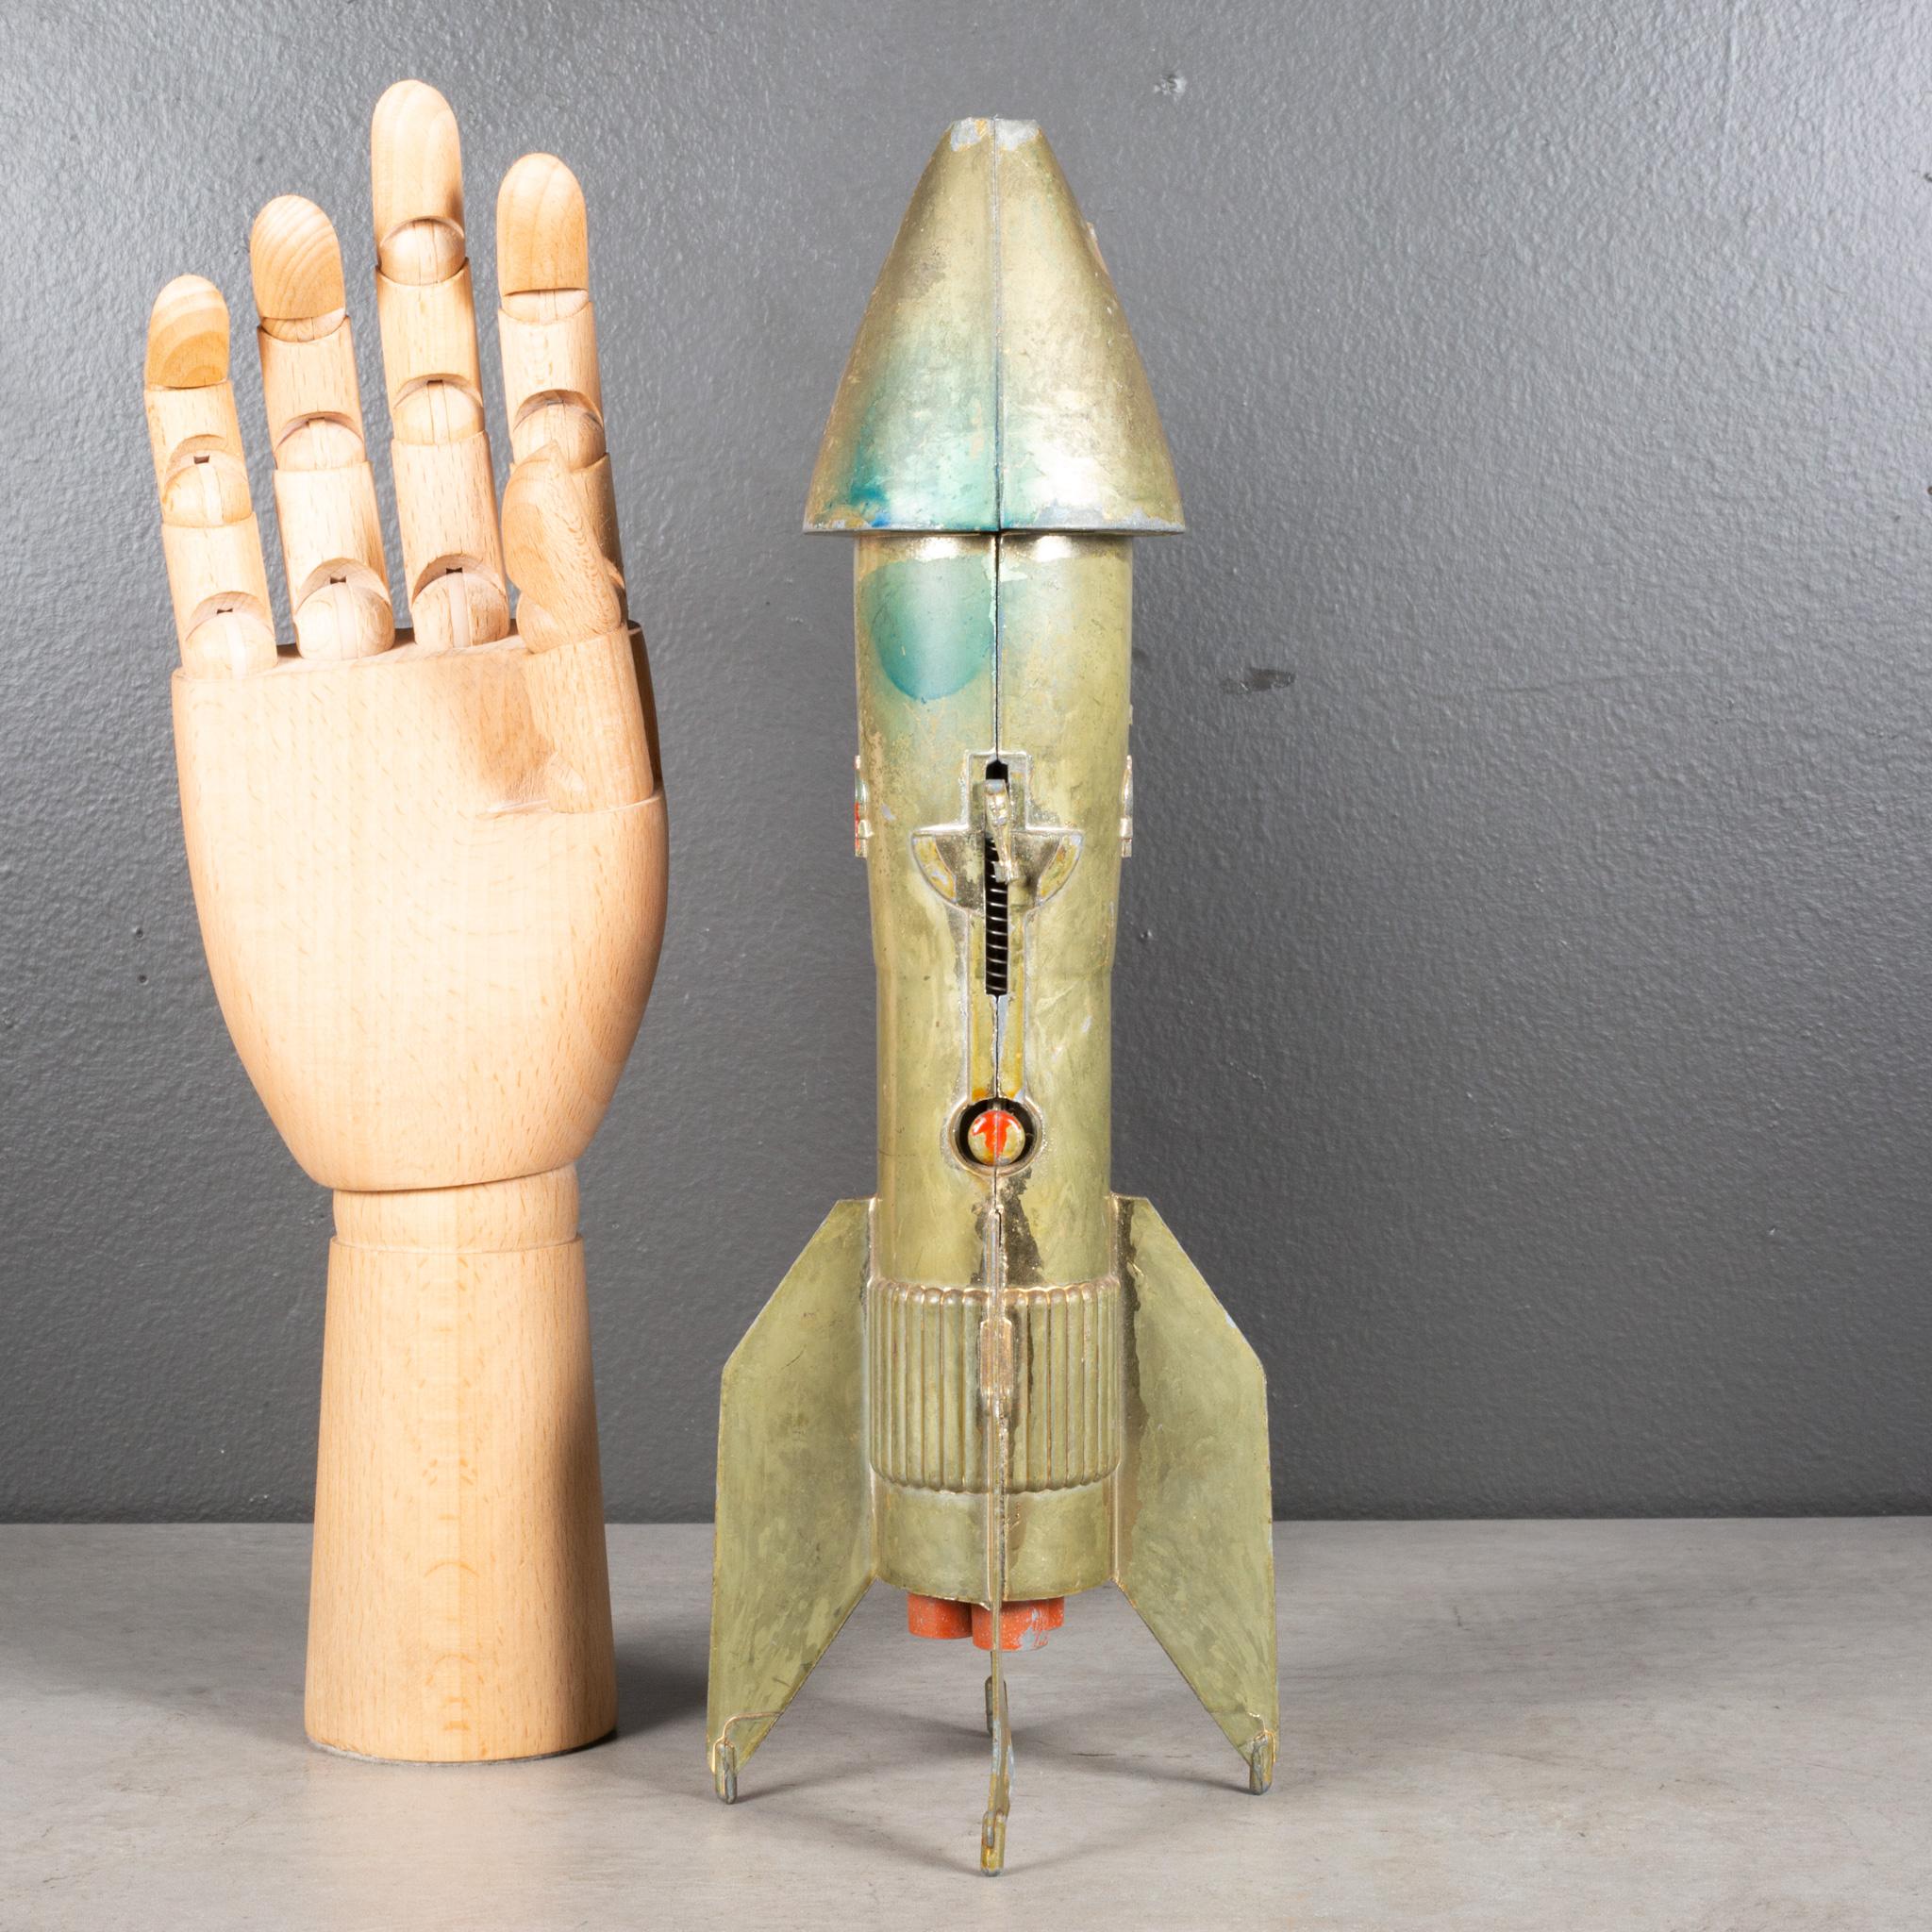 20th Century Vintage Astro Rocket Ship Savings Bank c.1957  (FREE SHIPPING) For Sale